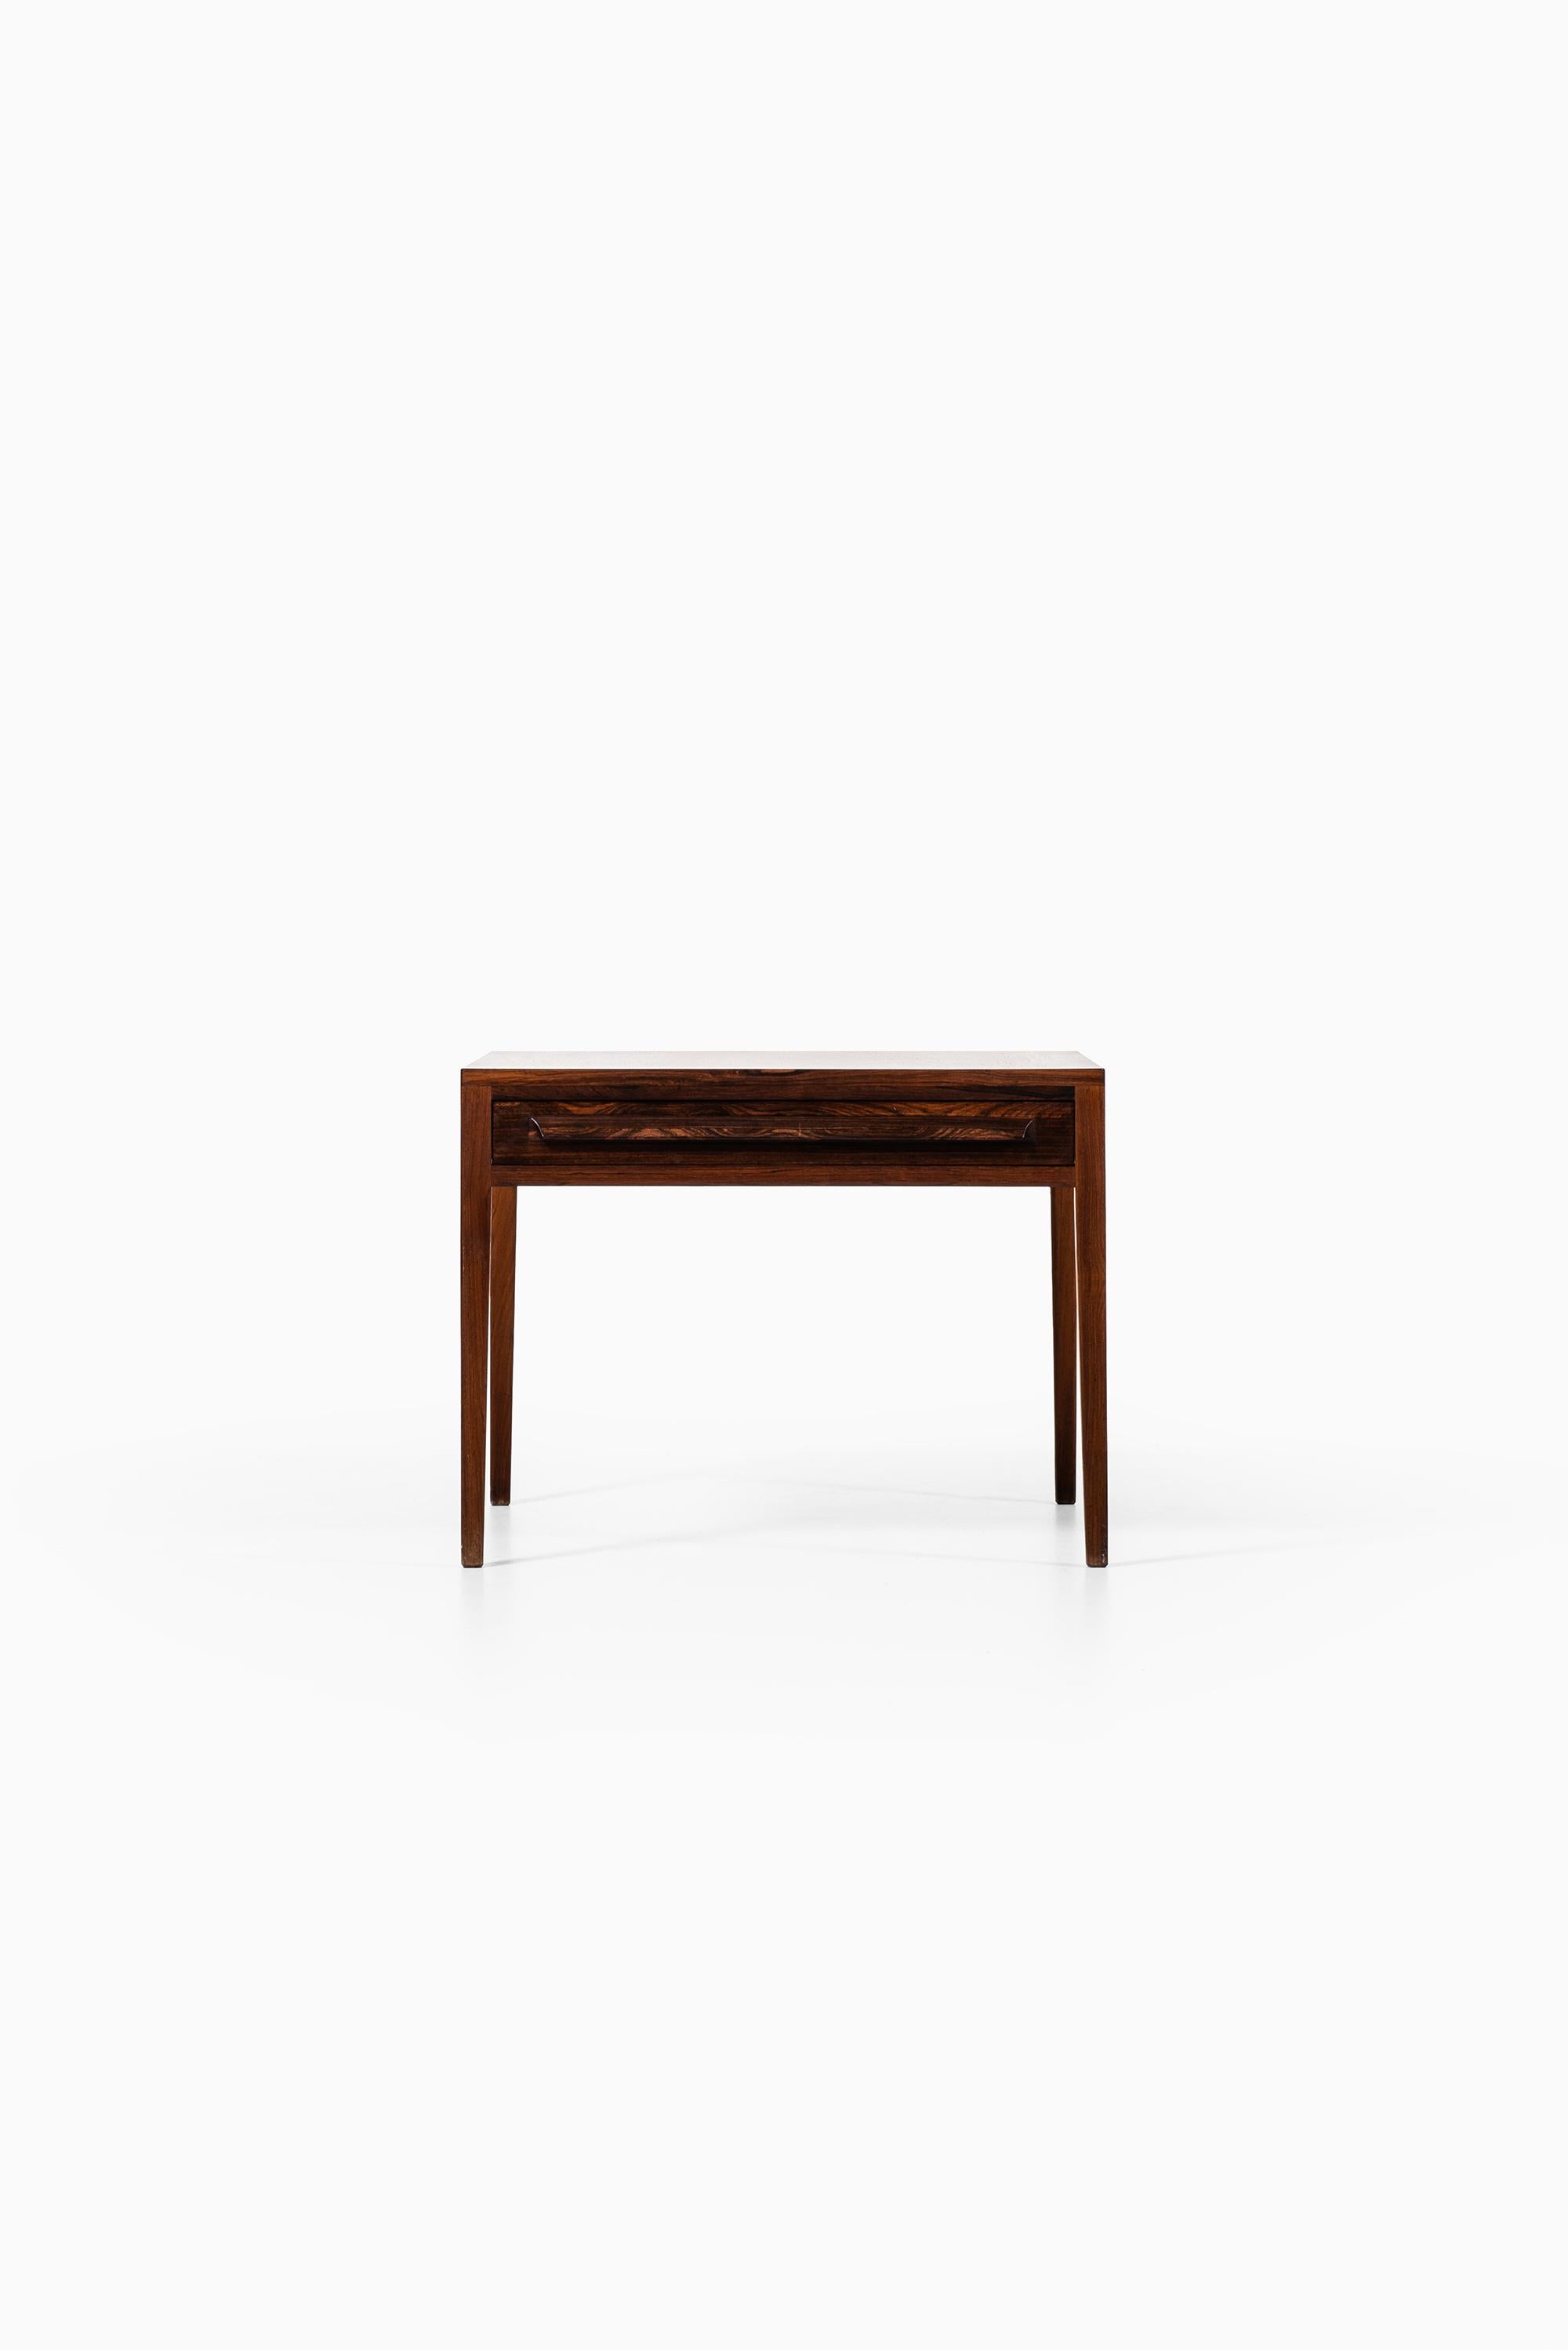 Rare side table with drawer in rosewood. Produced by O.P. Rykken & Co Møbelfabrikk in Norway.